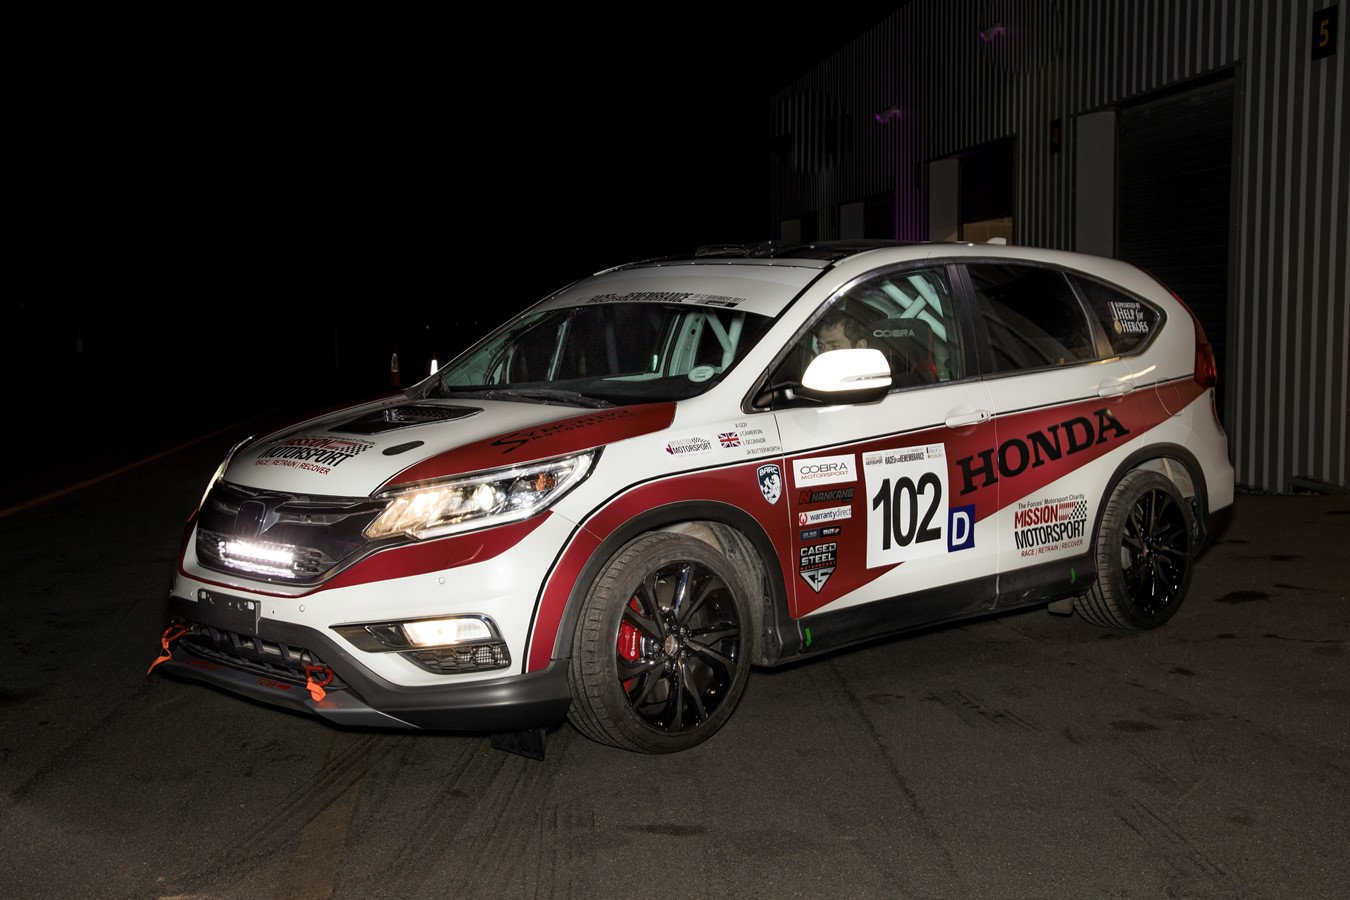 Honda UK and Mission Motorsport create first ever CR-V diesel race car for Race of Remembrance